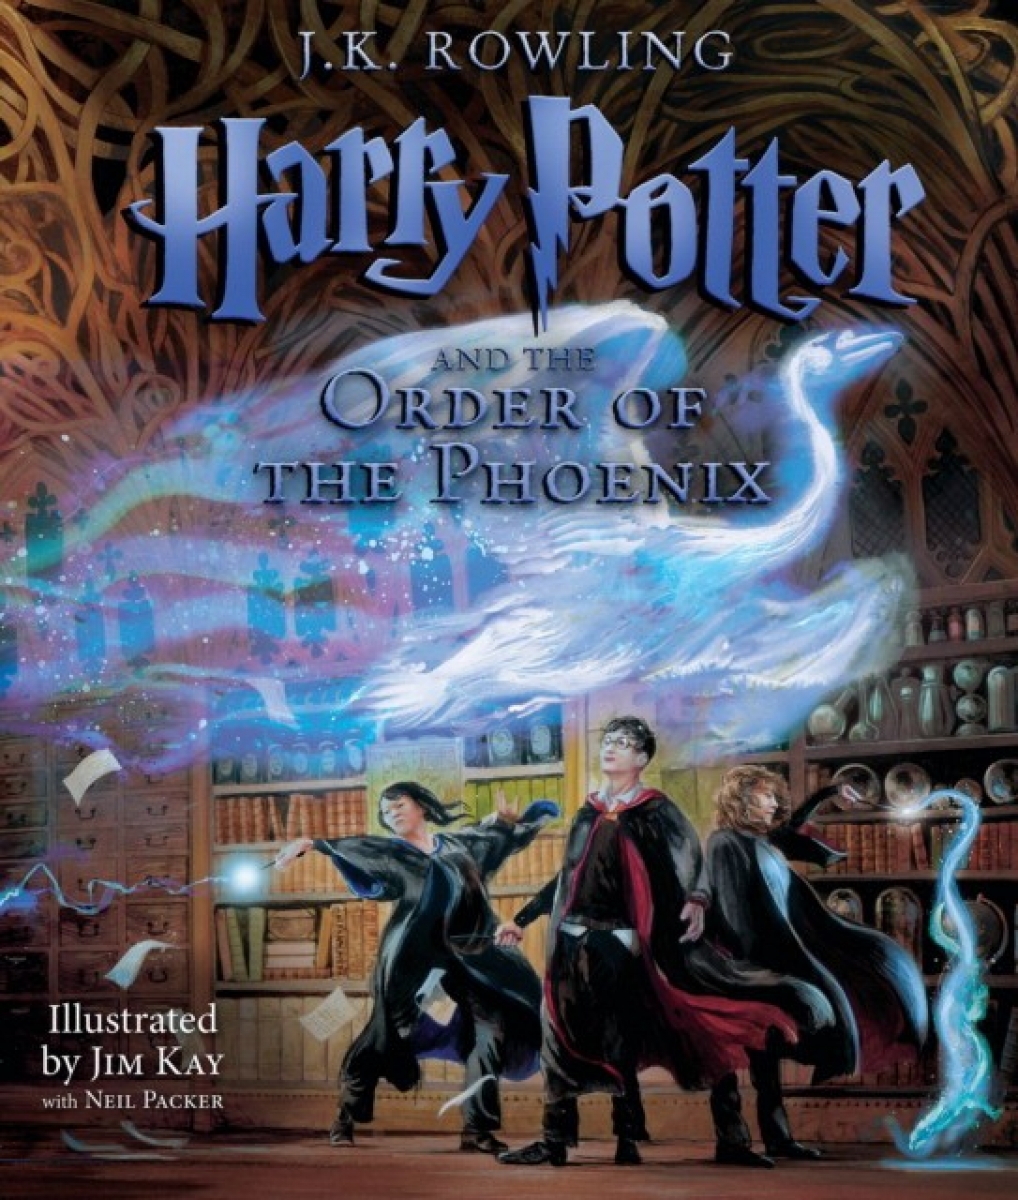 Rowling J.K. Harry Potter and the Order of the Phoenix: The Illustrated Edition (Harry Potter, Book 5) (Illustrated Edition) 